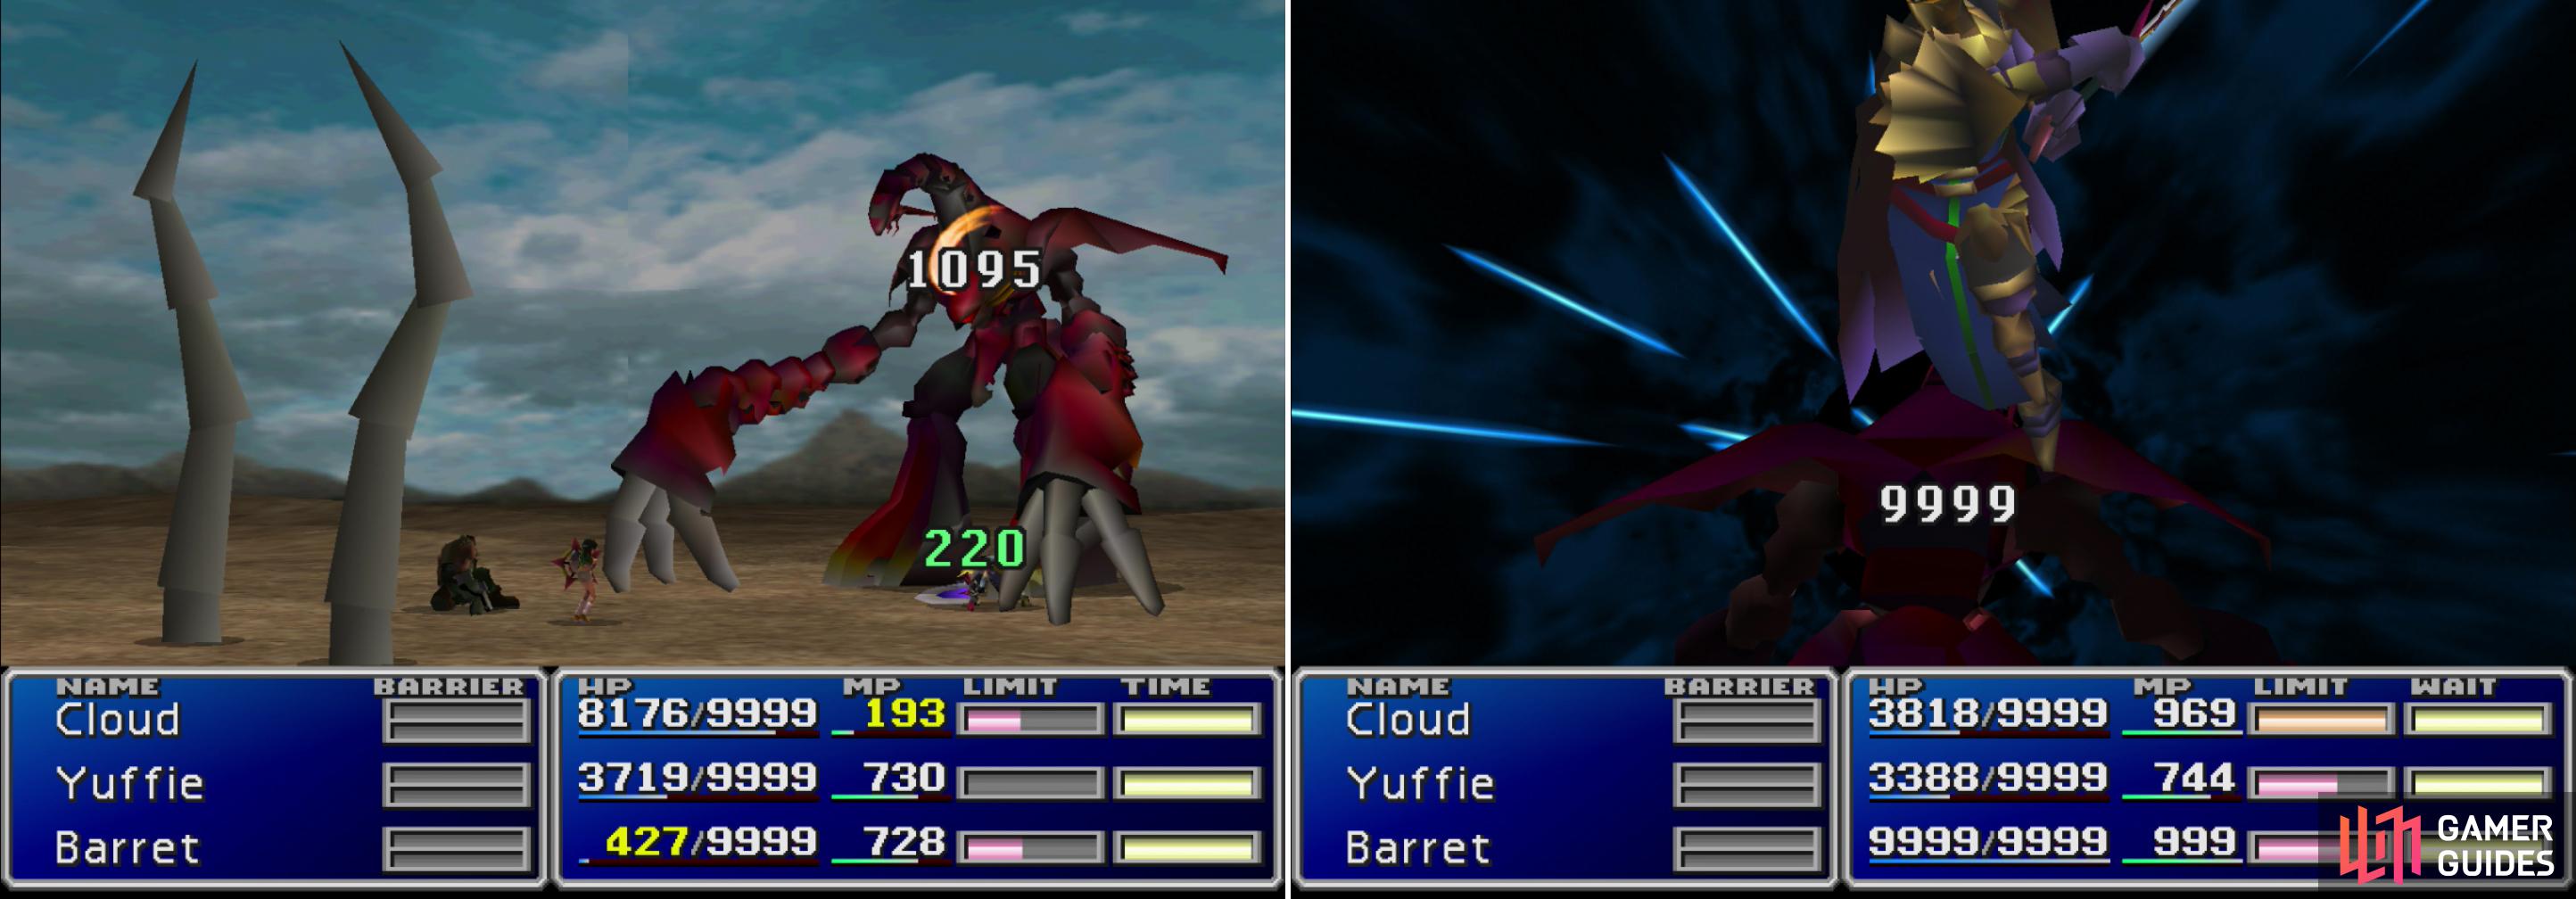 Ruby Weapon is highly resistant to physical attacks (left) so the Command Materia Strategy won’t work here. Knights of the Round - perhaps boosted with MP Turbo - will deal massive damage, however (right).